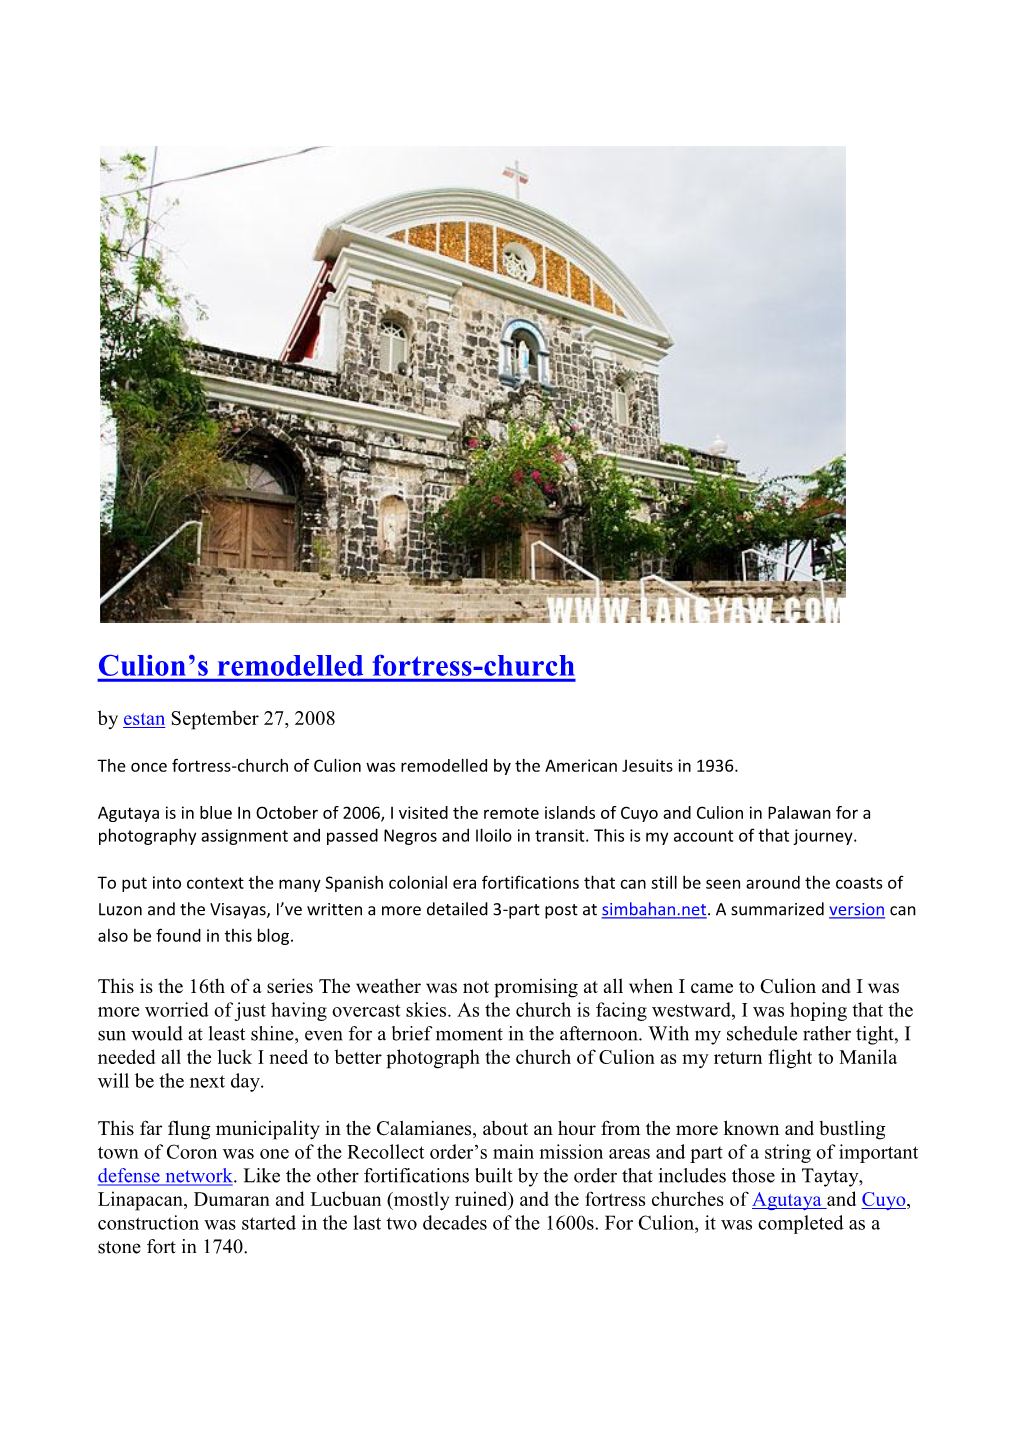 Culion's Remodelled Fortress-Church